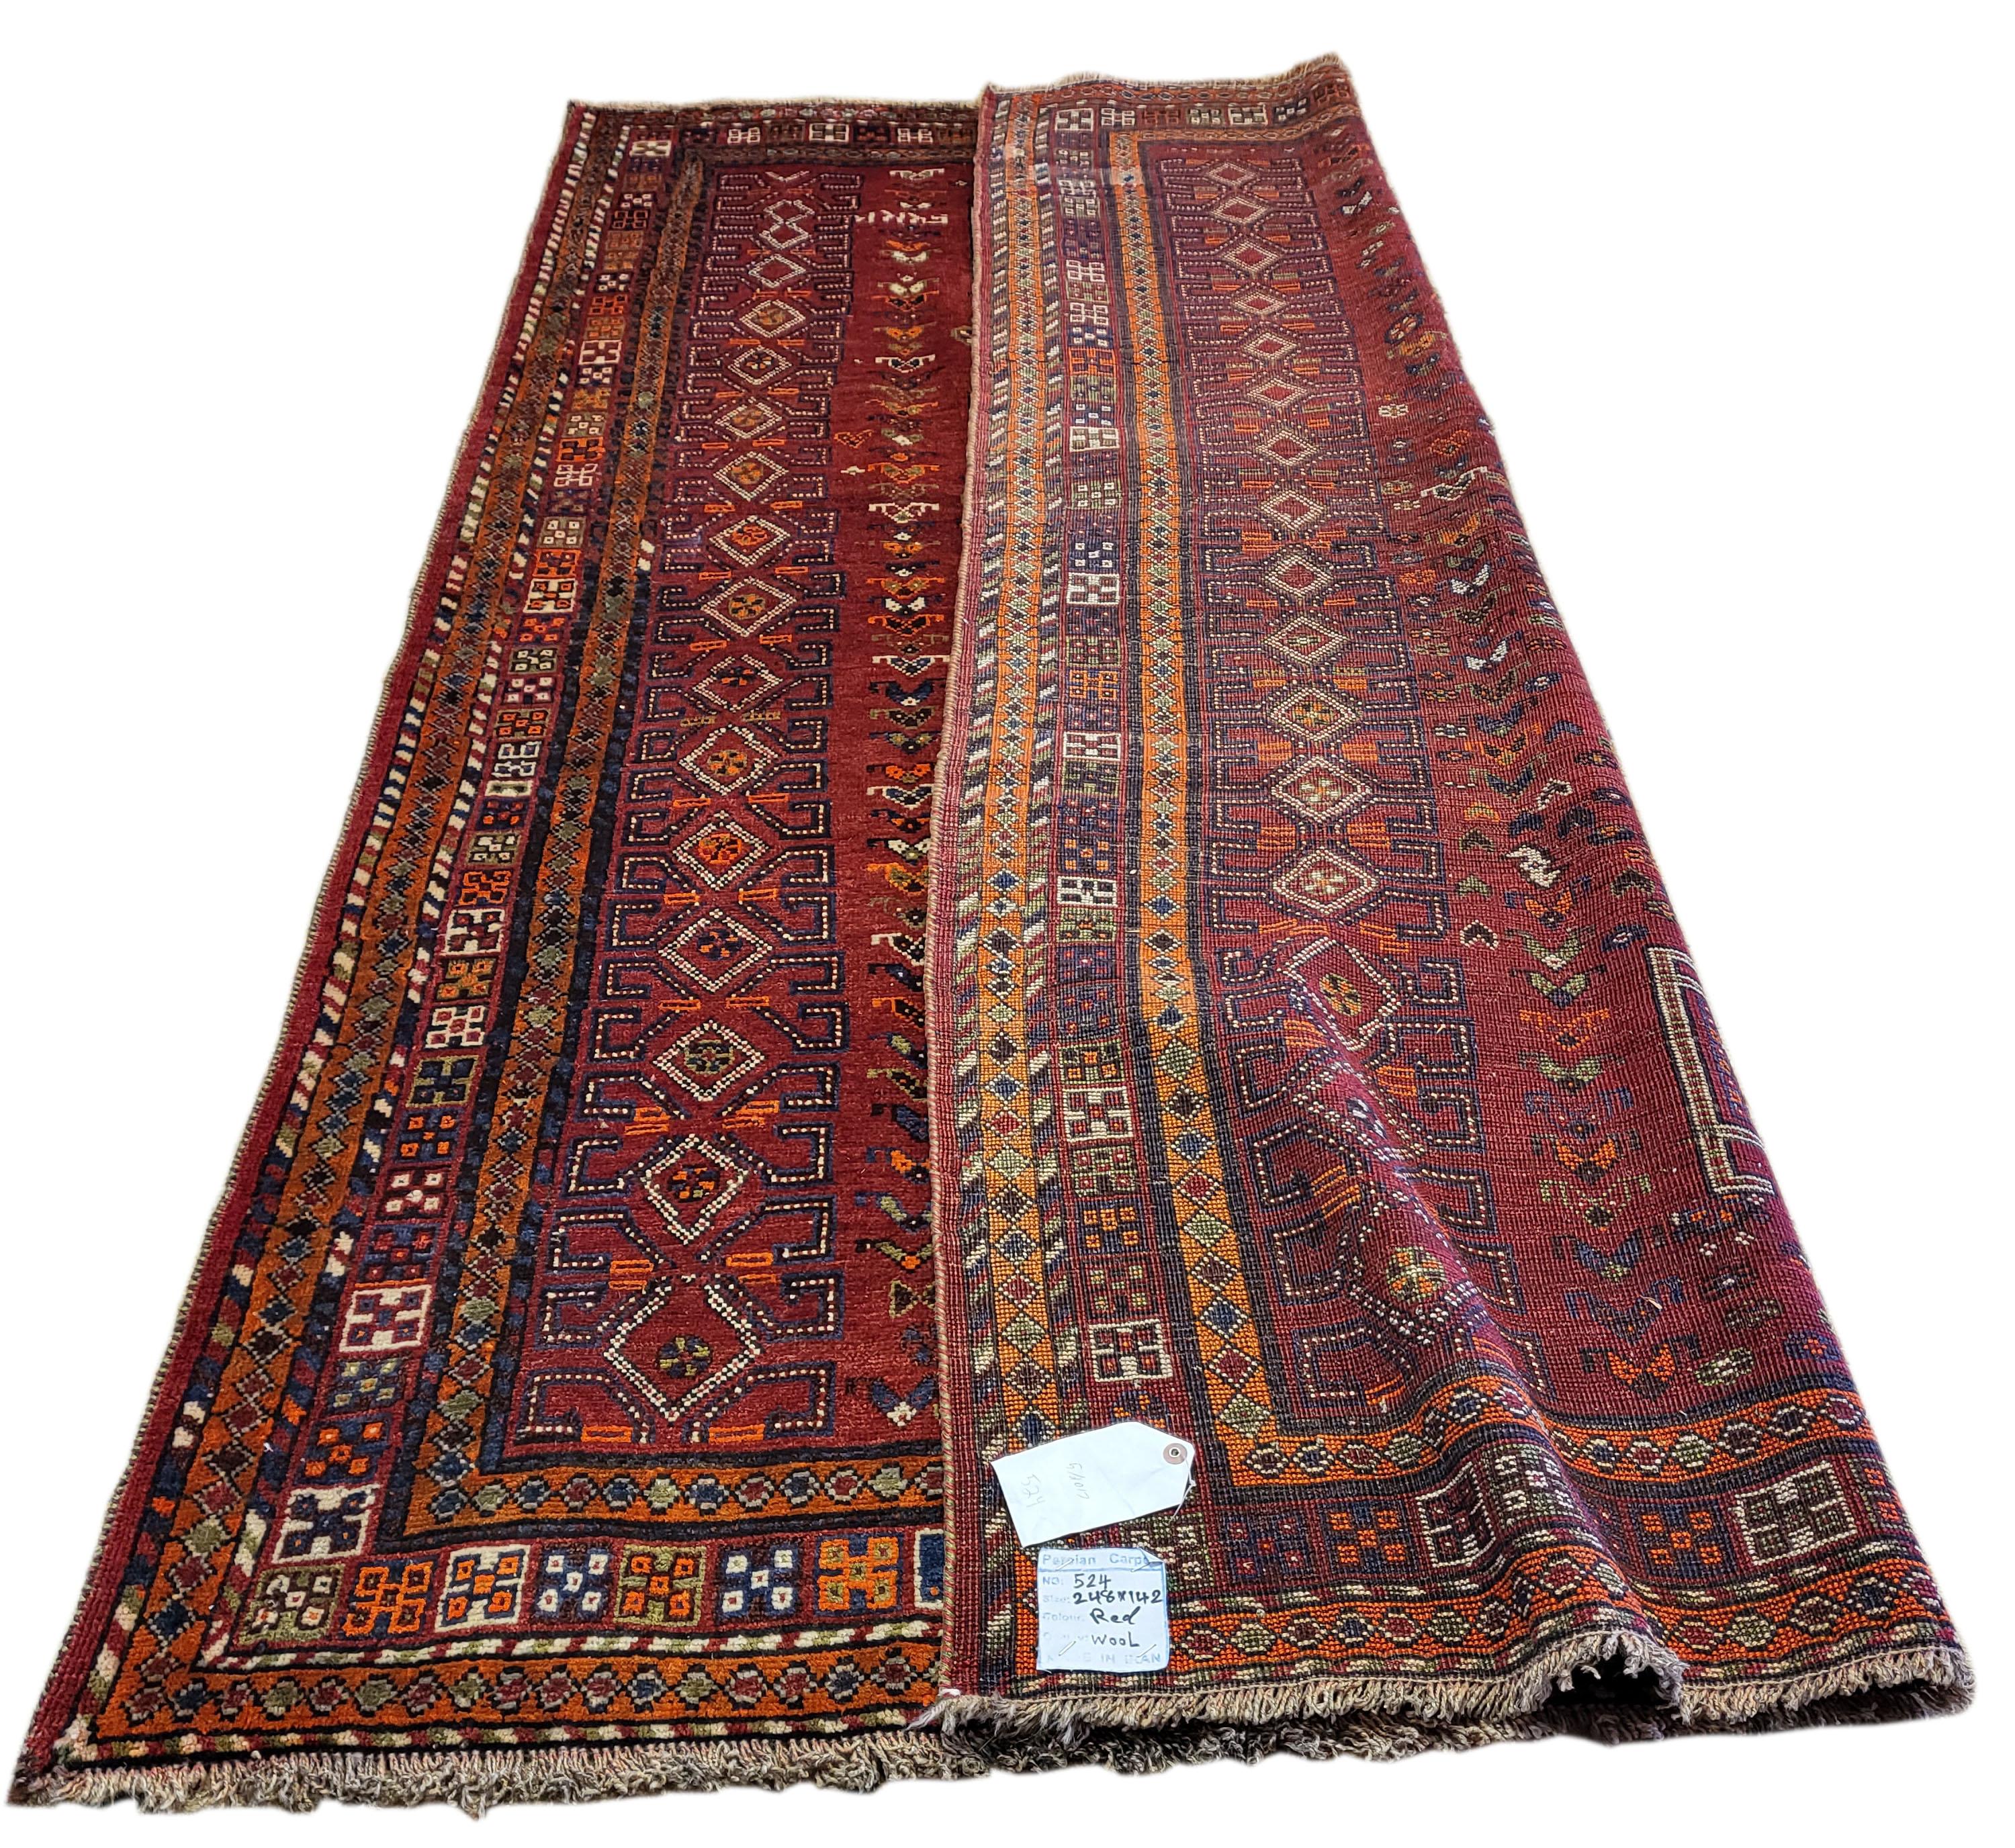 Absolutely incredible 1940's Persian Lori. This piece of nomadic heritage is absolutely stunning! The Lors of Iran are some of the most creative and skilled tribe of weavers in the world! They chose the finest wool, and most beautiful natural dyes